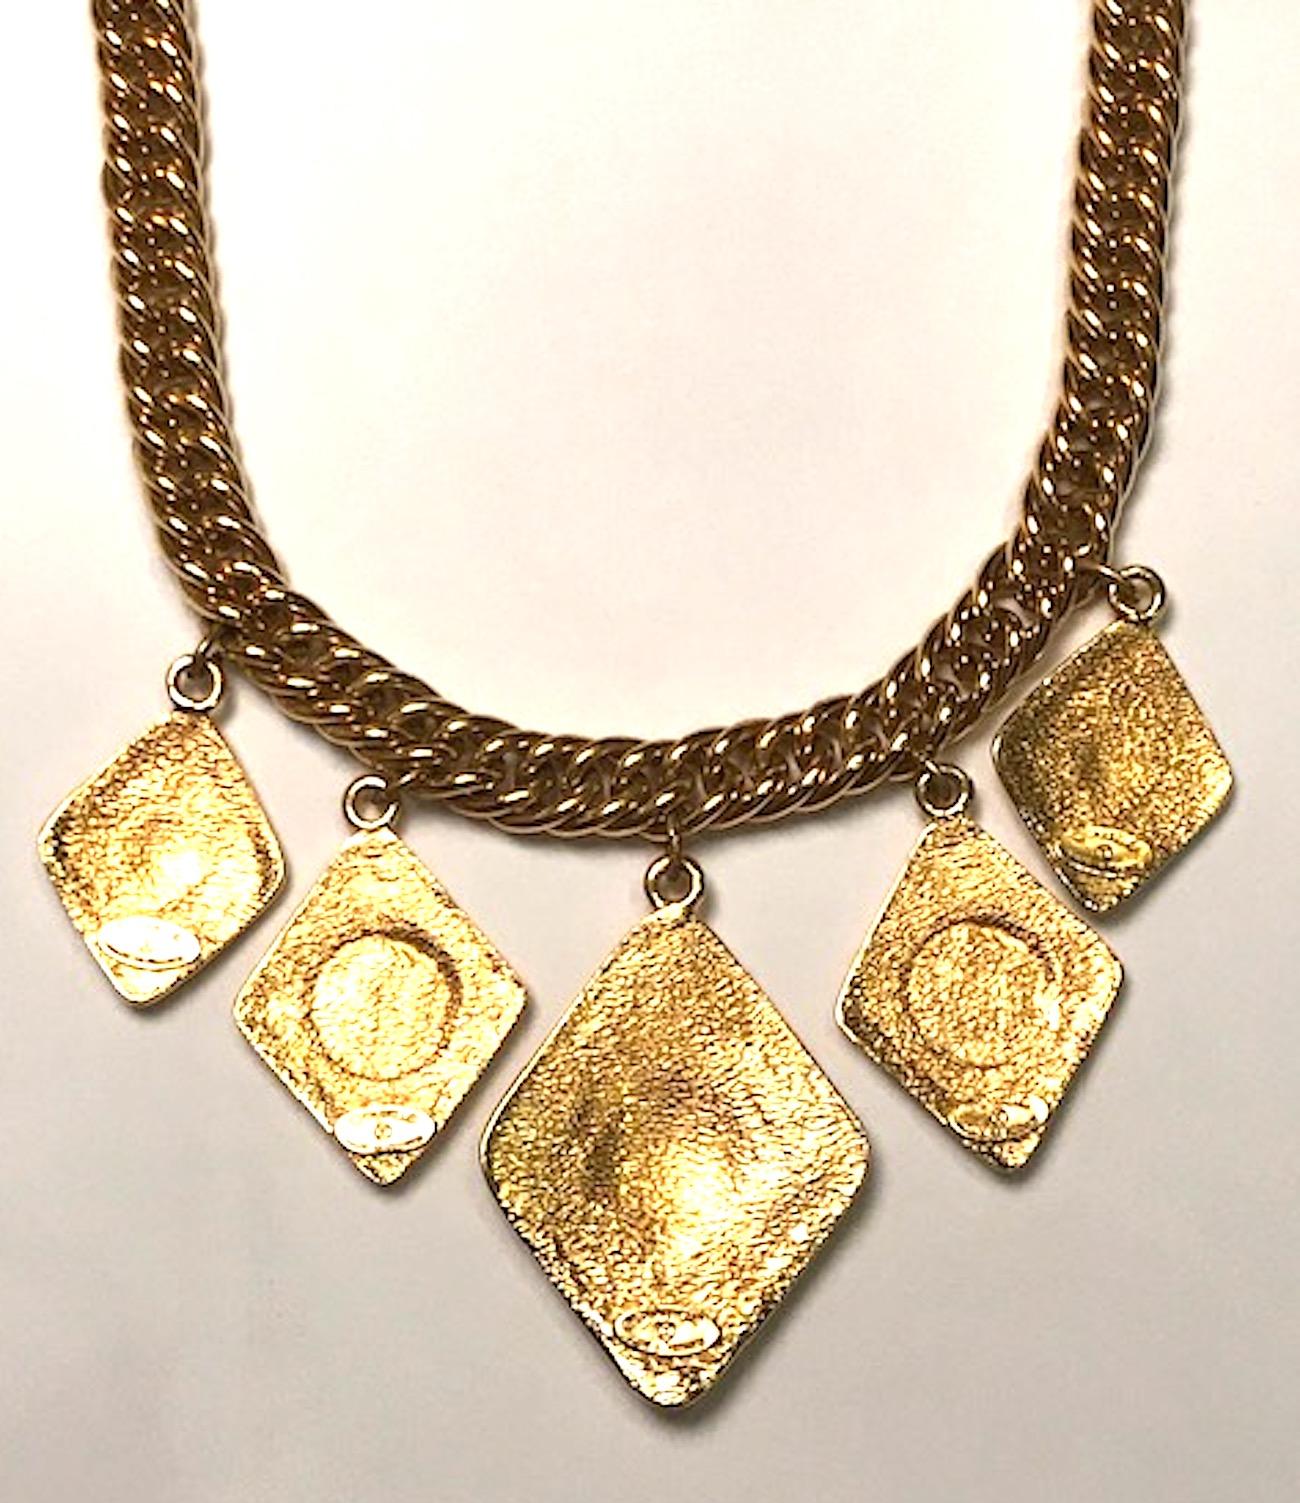 Chanel 1980s 5 Charm Necklace 5